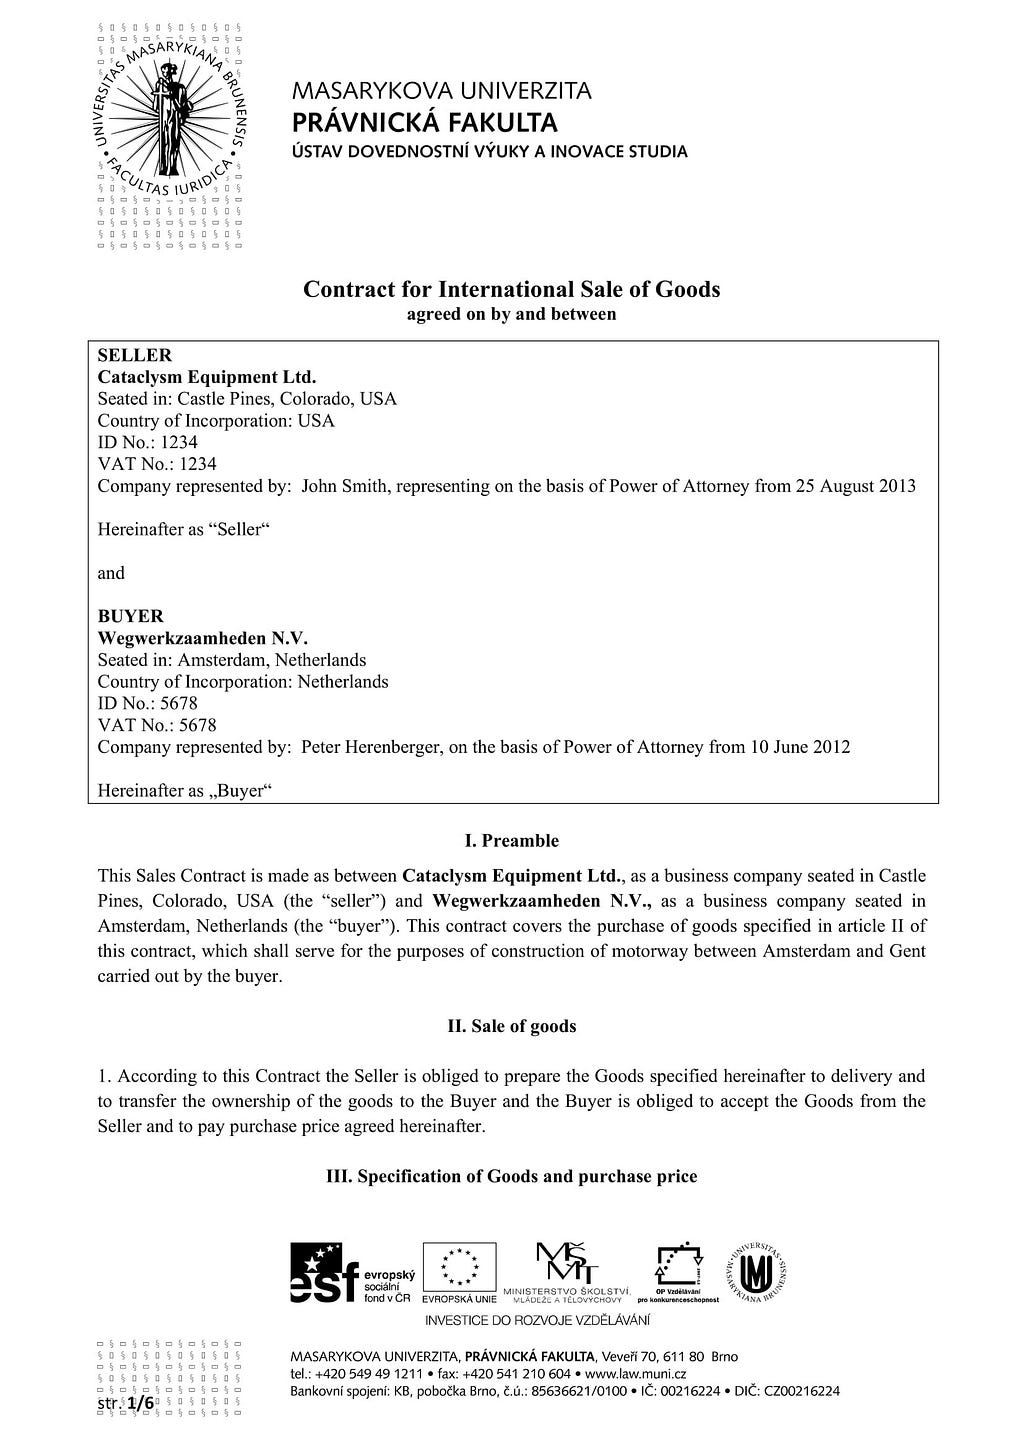 FREE 3+ Sale of Goods Agreement Contract Forms in PDF MS Word